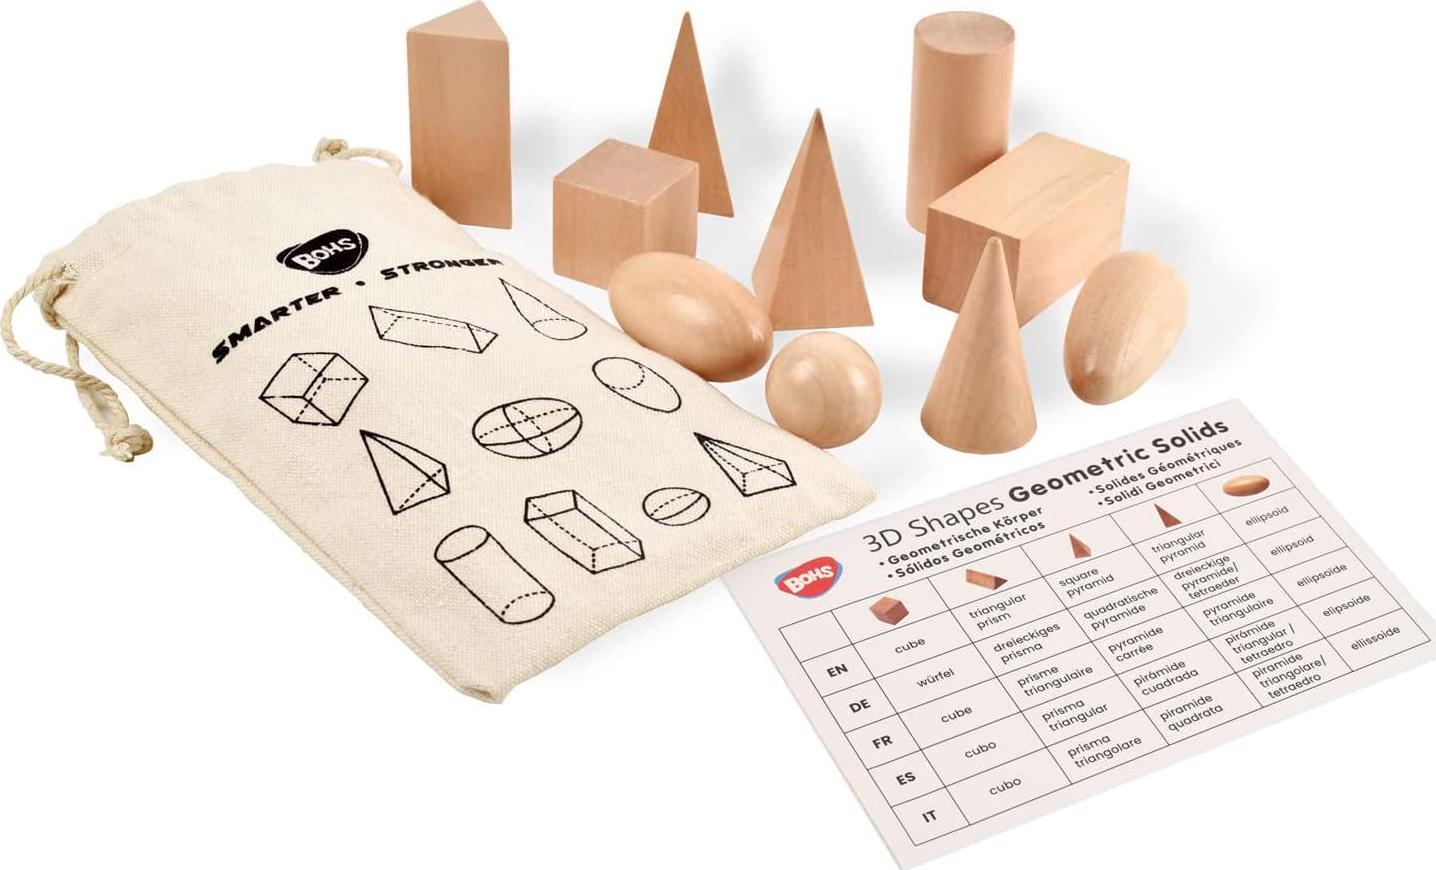 BOHS, Geometry Solids Guess Game - 3D Shapes Miniature Set -Wooden Montessori Toys - Pack of 10pcs - Ages 3 and Up